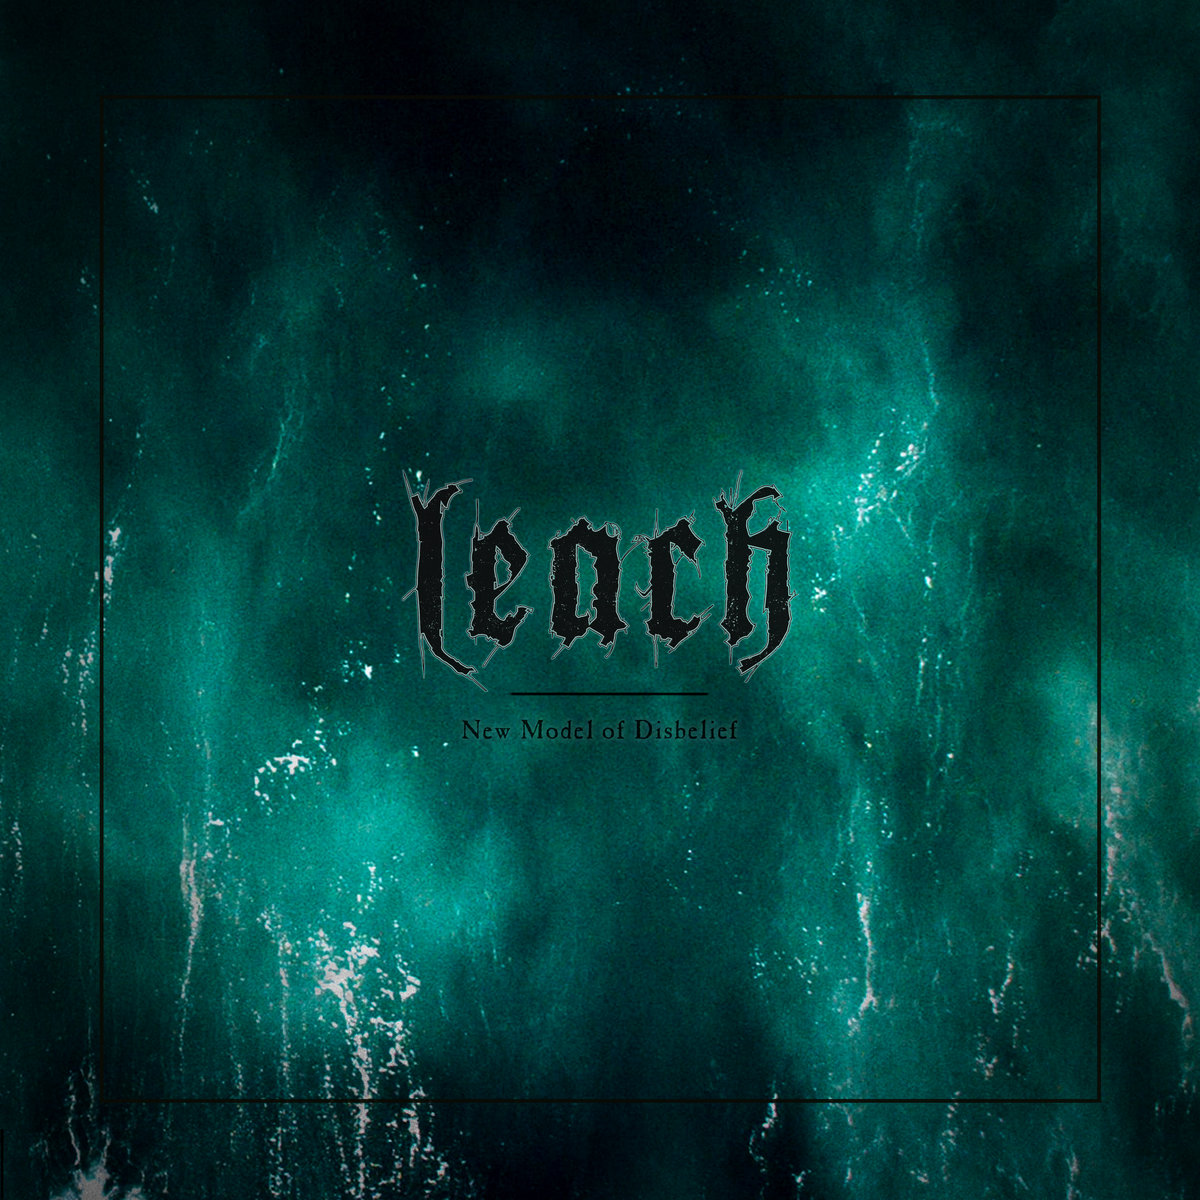 ALBUM REVIEW: New Model Of Disbelief by Leach